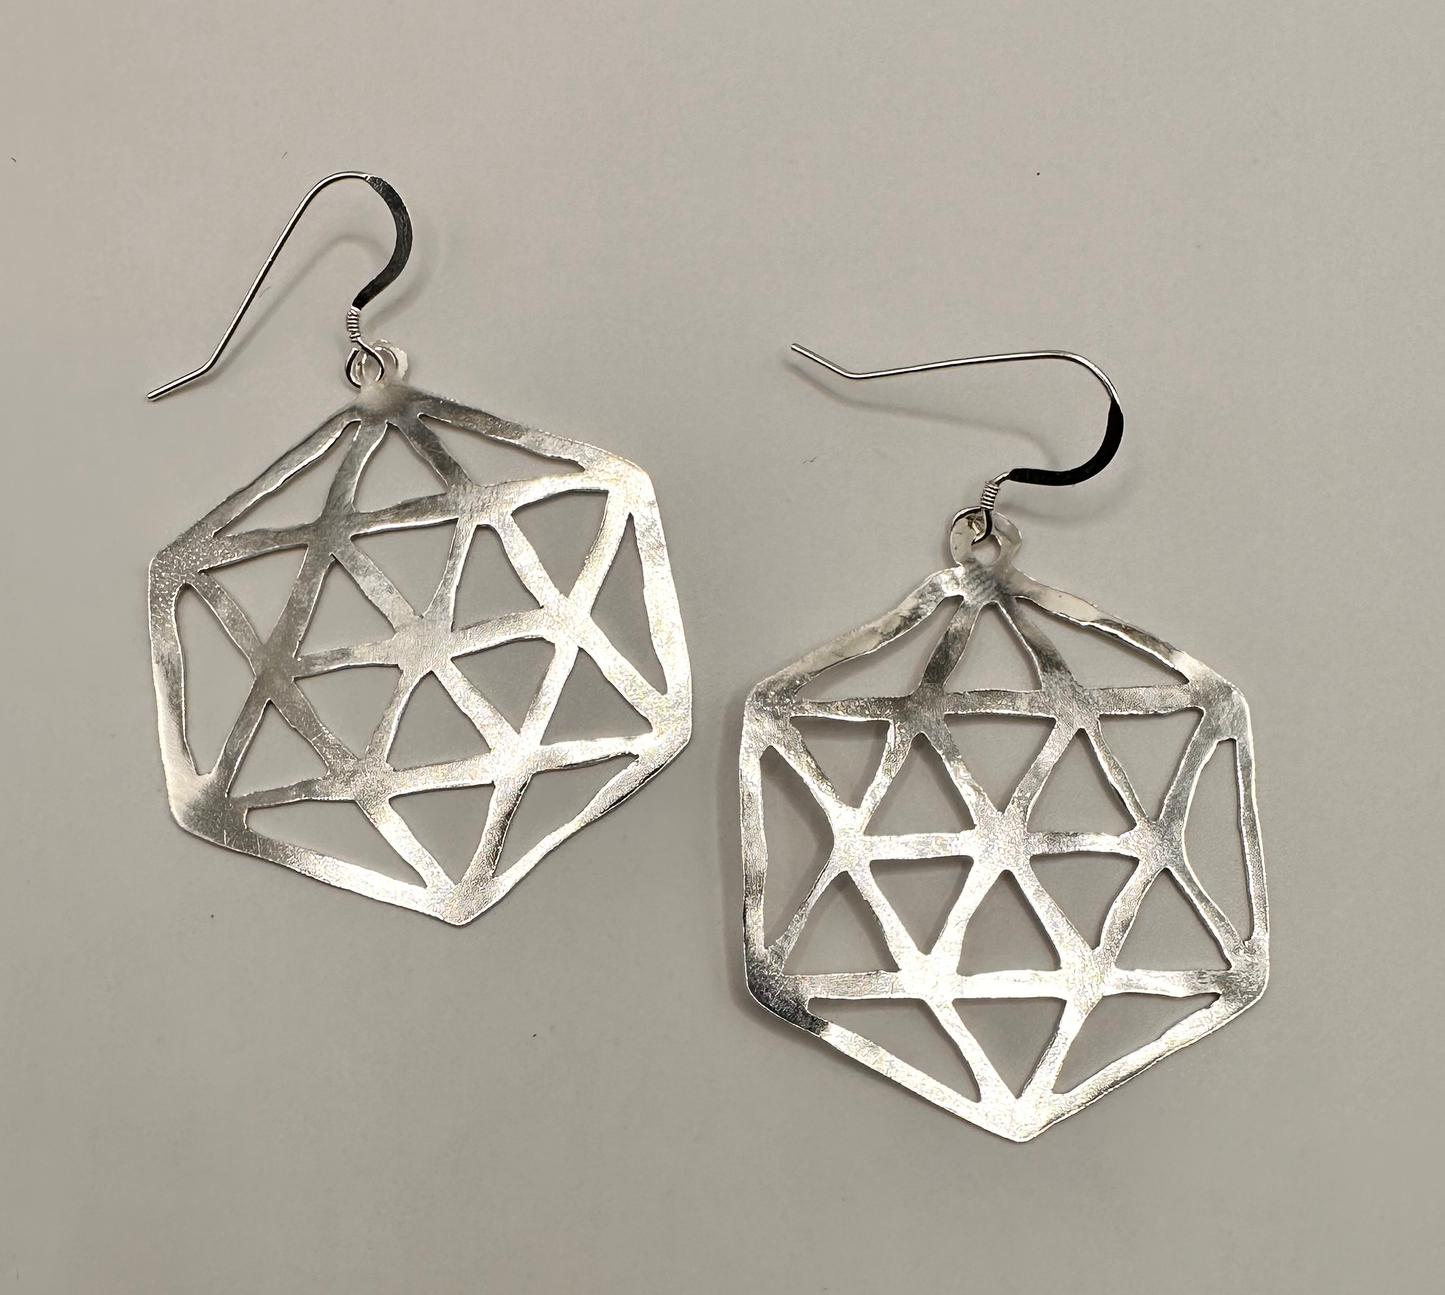 Artisan Crafted Geometric Patterned Earrings